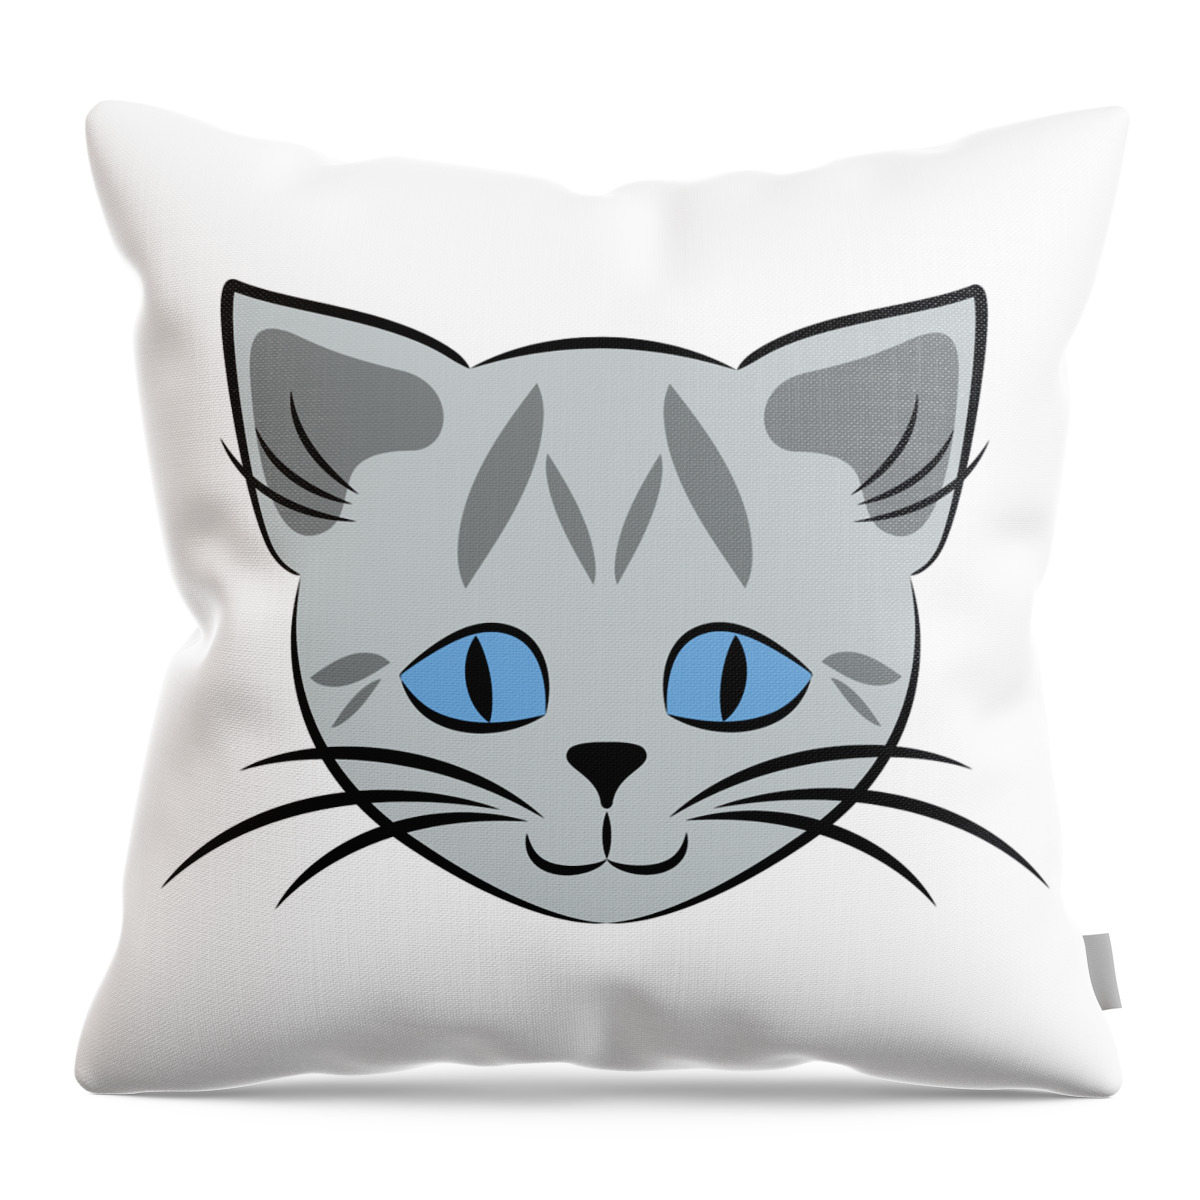 Graphic Cat Throw Pillow featuring the digital art Cute Gray Tabby Cat Face by MM Anderson